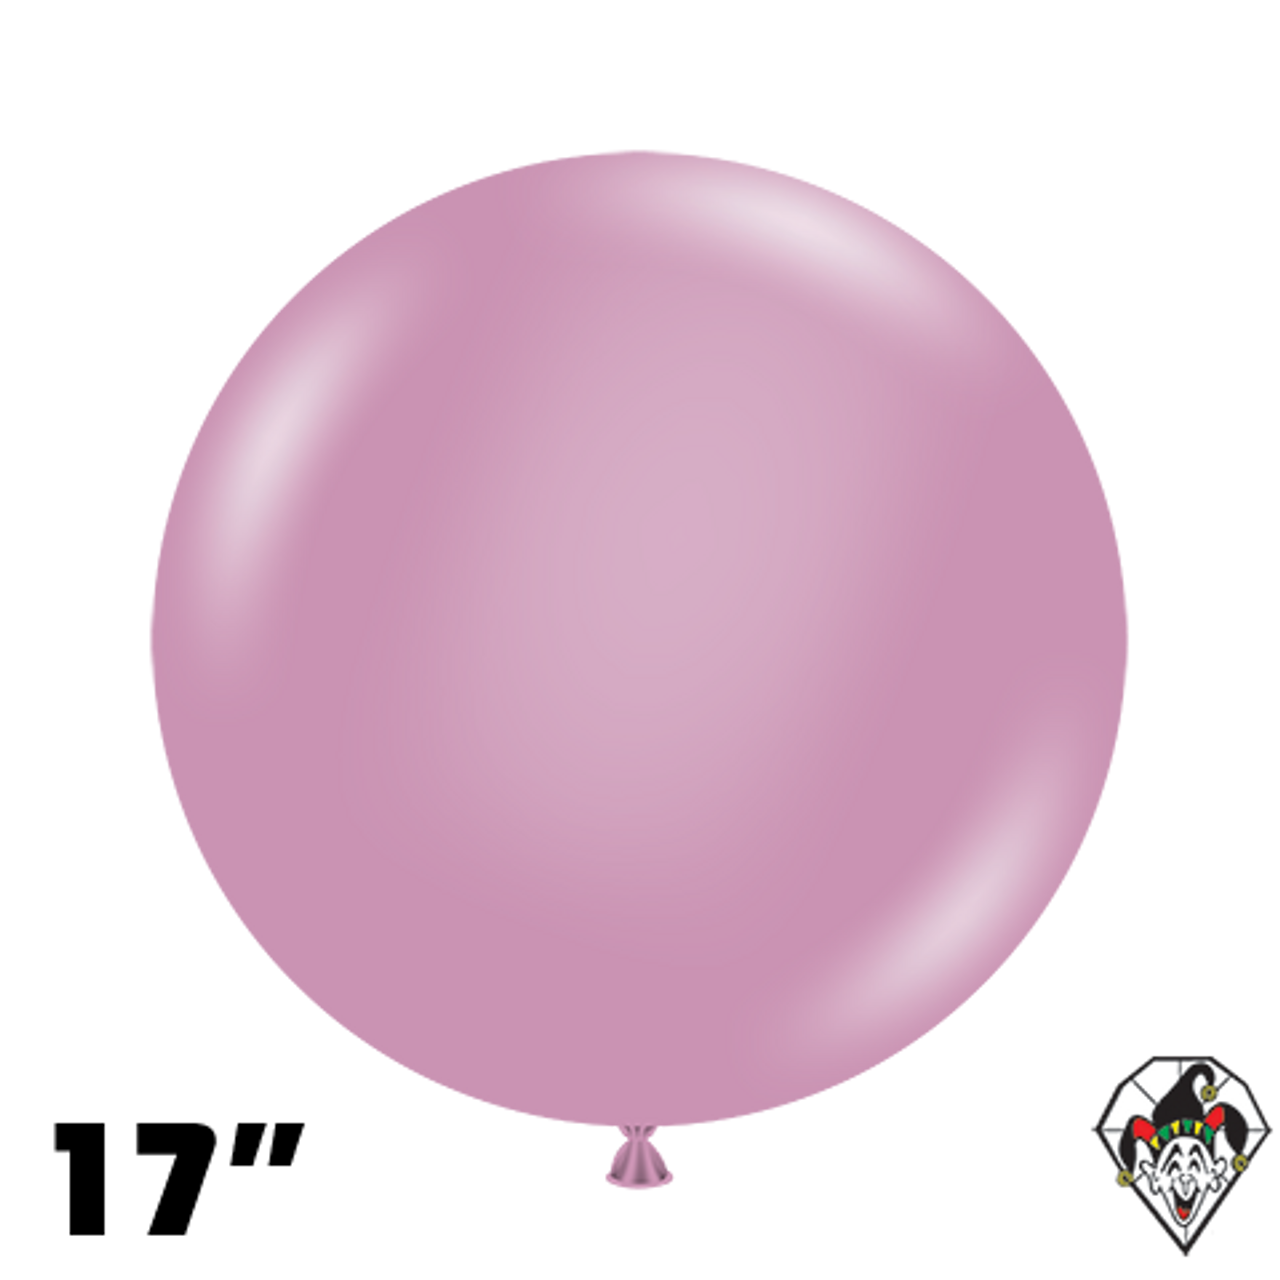 TUFTEX 17 Inch Round Canyon Rose Balloons 50ct